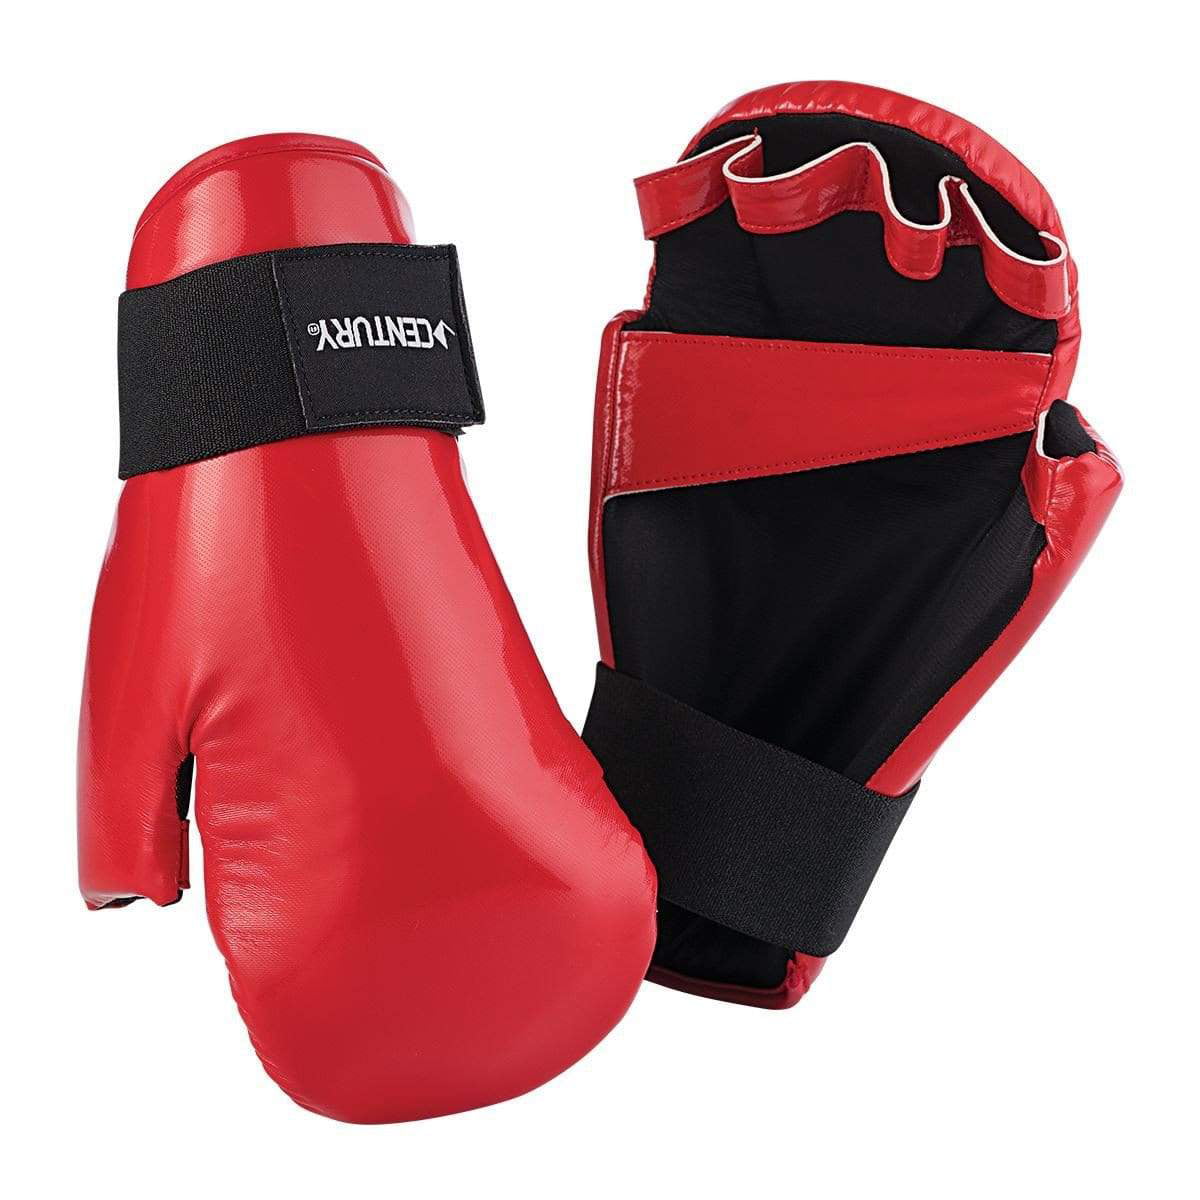 Century Martial Arts Student Hook and Loop Sparring Gloves Red 